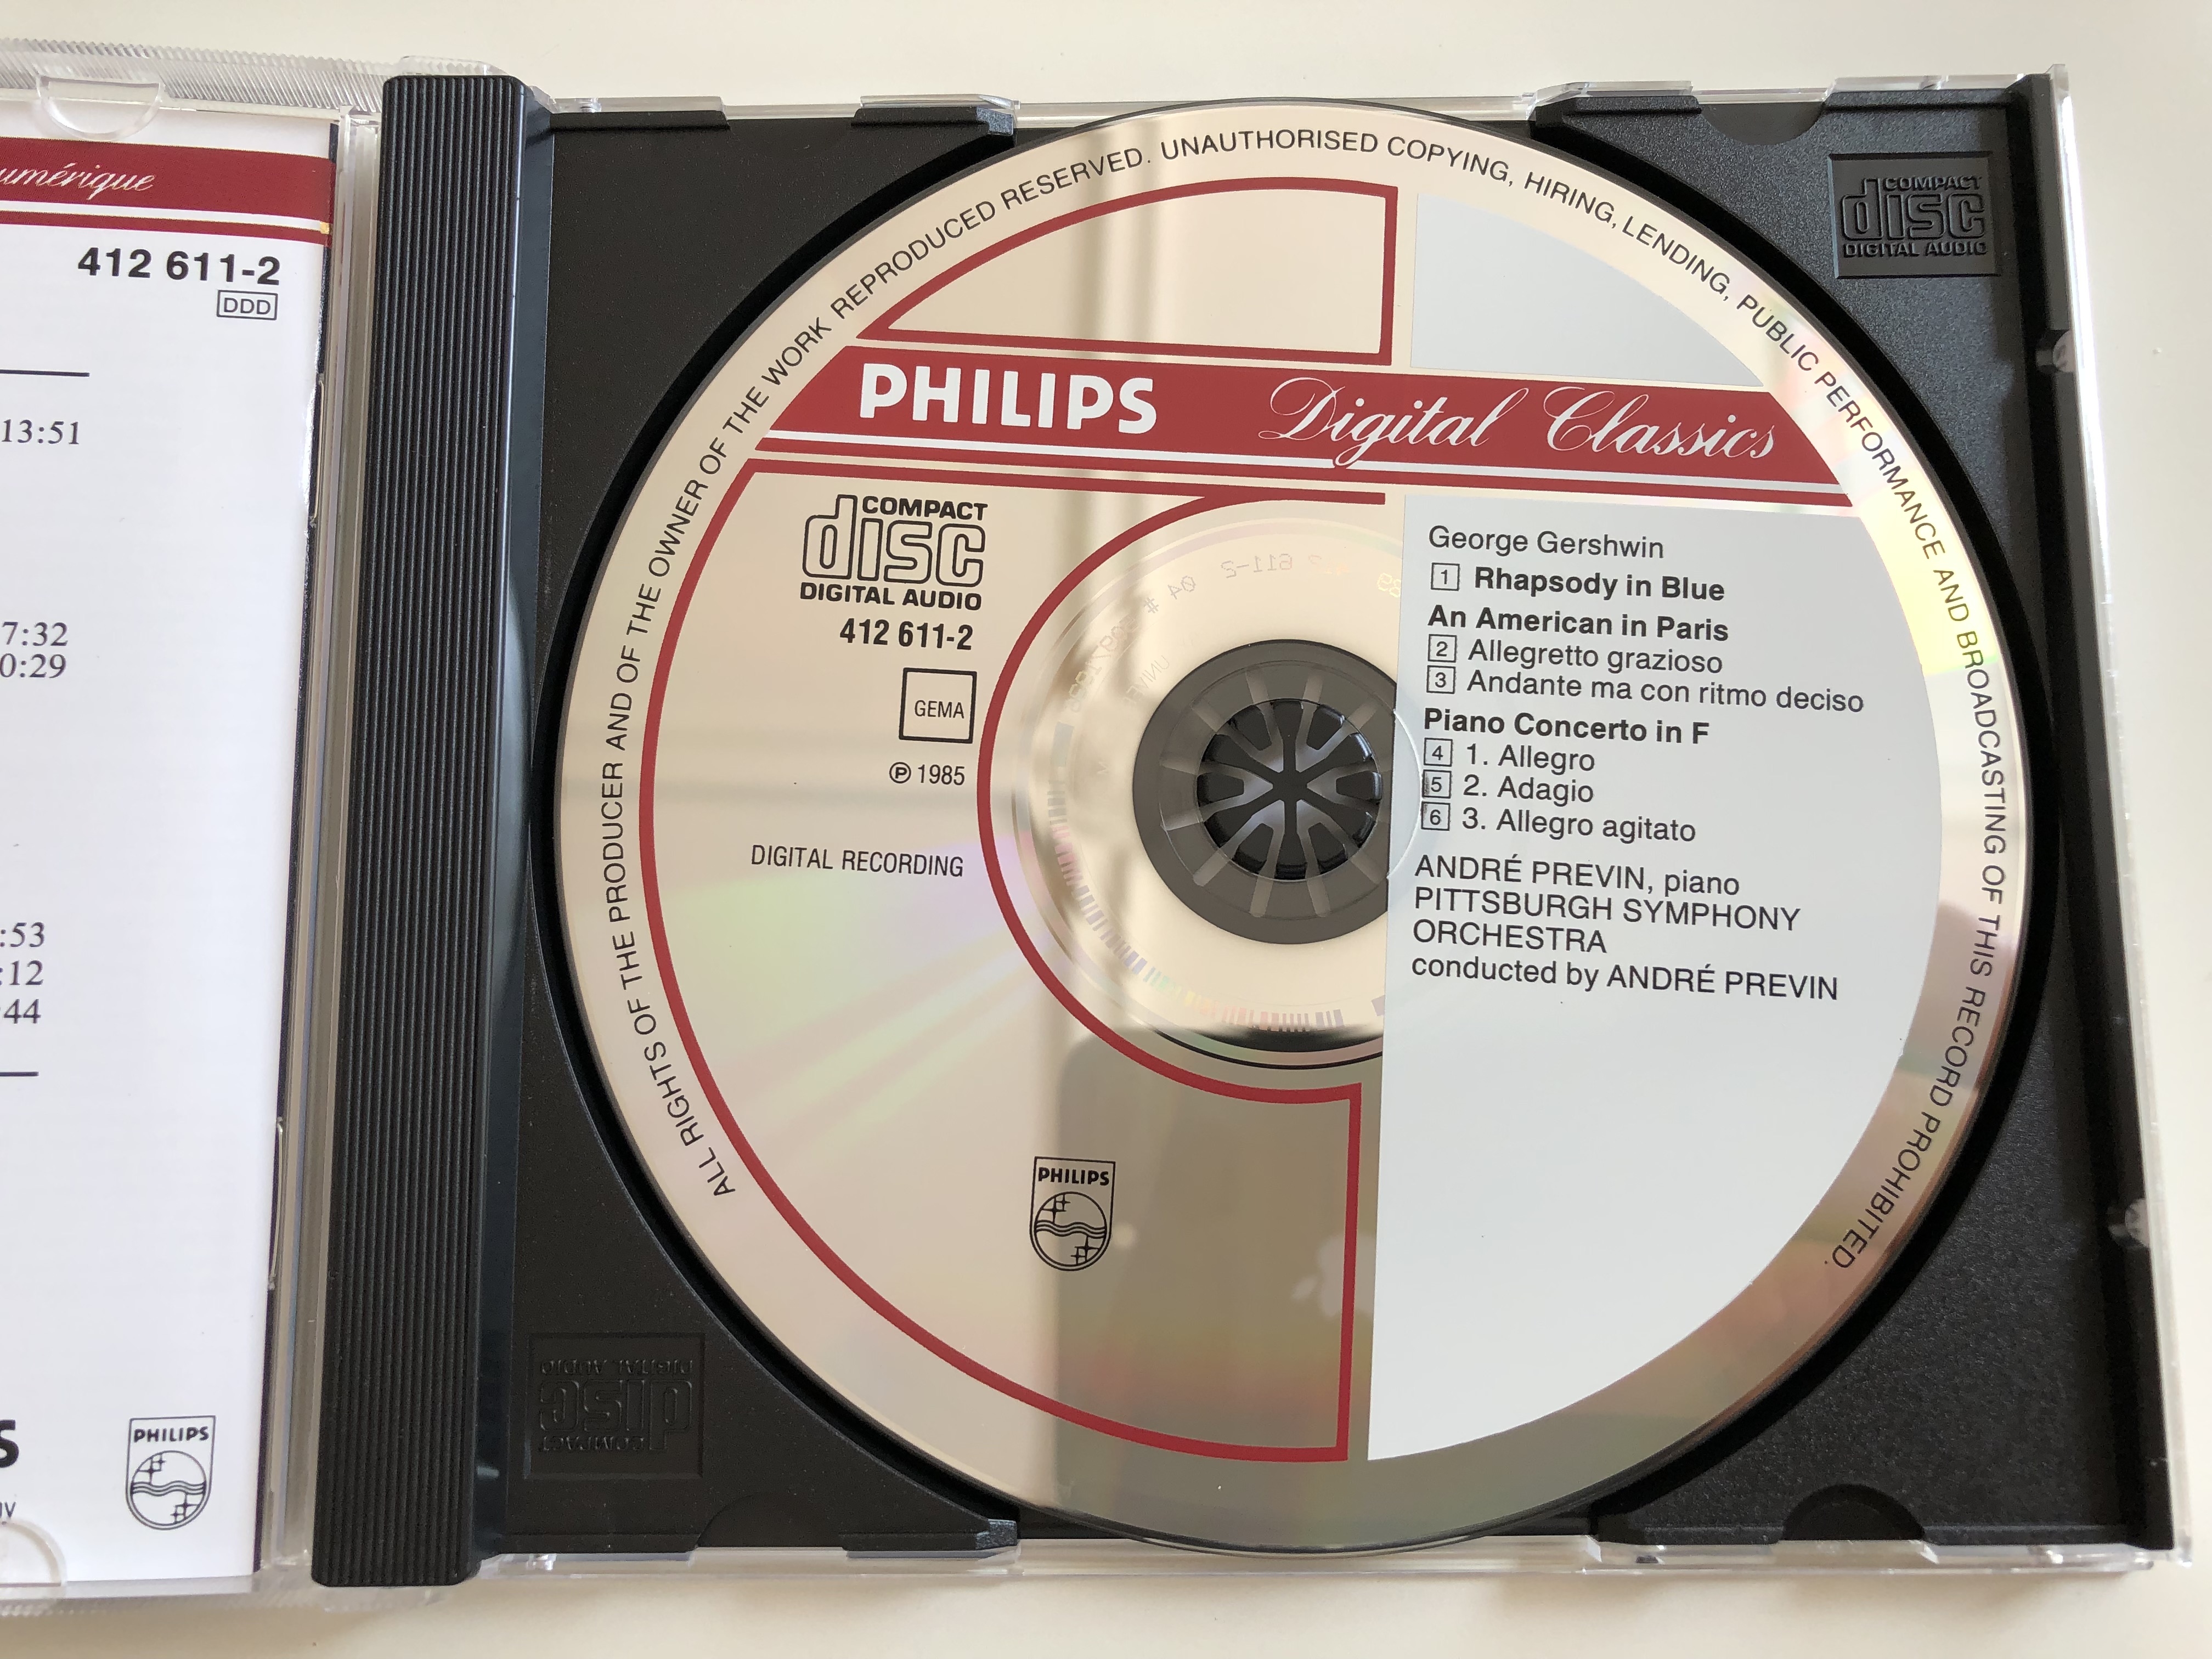 gershwin-rhapsody-in-blue-piano-concerto-in-f-an-american-in-paris-pittsburg-symphony-orchestra-soloist-conductor-andr-previn-philips-digital-classic-audio-cd-1985-412-611-2-3-.jpg